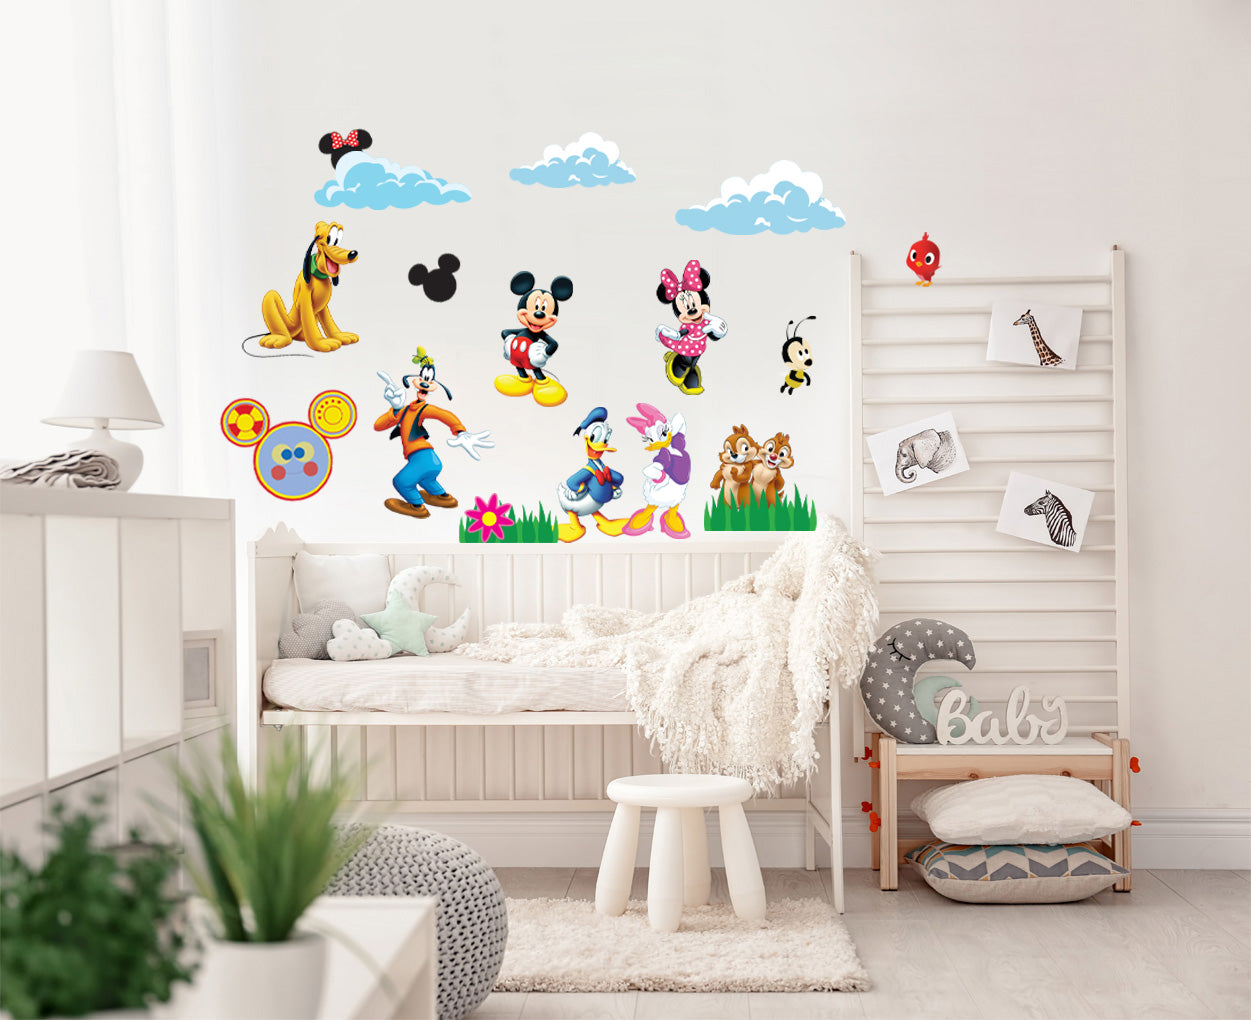 Disney Movie Wall-E Charcters Wall-E And Eve Silhouette Cute Characters  Wall-E Eve Vinyl Wall Decal Wall Sticker Wall Art Decoration Home Room  Bedroom